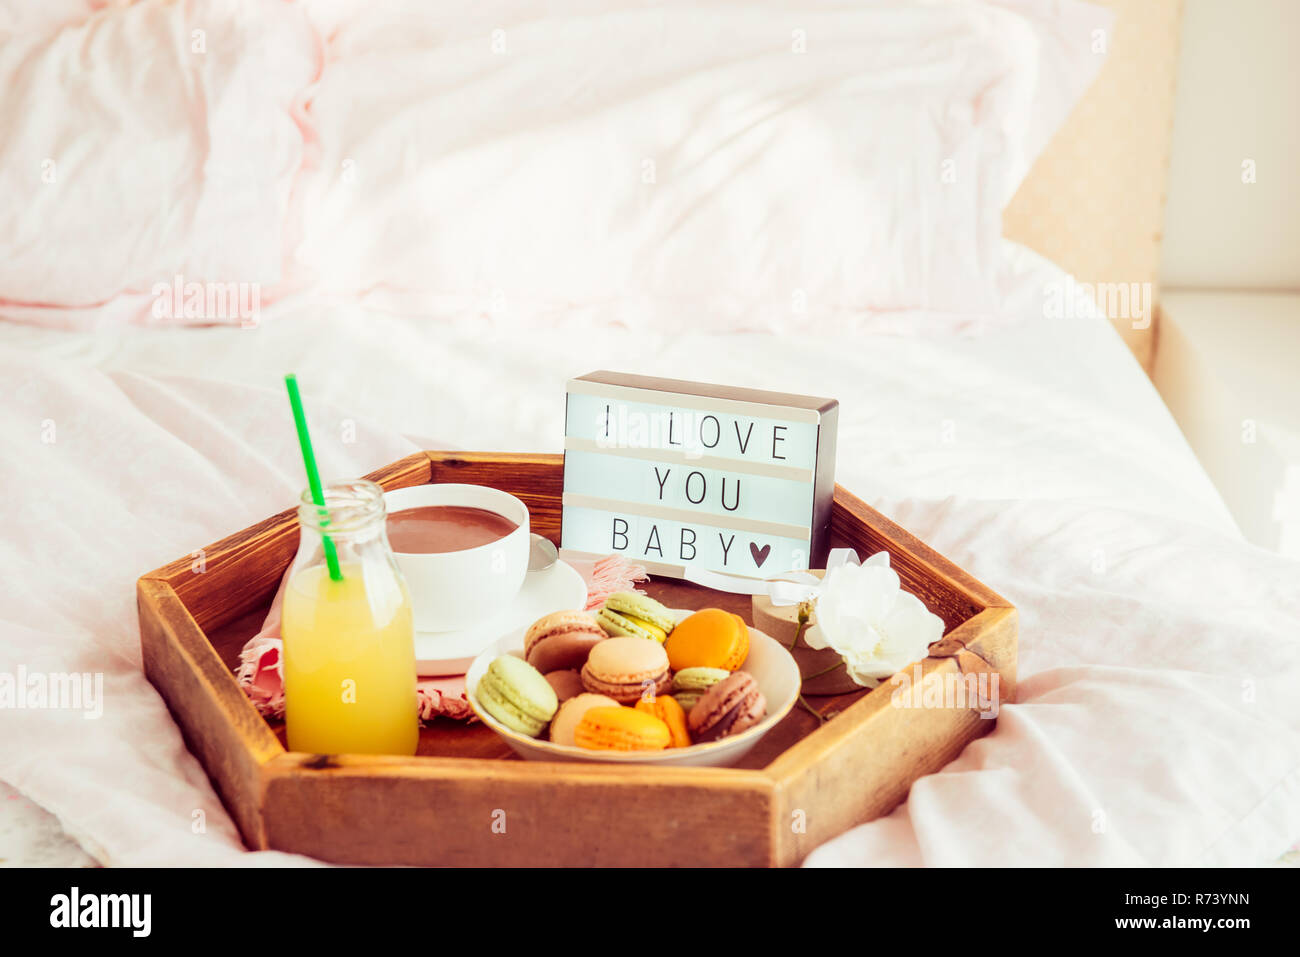 https://c8.alamy.com/comp/R73YNN/romantic-breakfast-in-bed-with-i-love-you-baby-text-on-lighted-box-cup-of-coffee-juice-macaroons-flower-and-gift-box-on-wooden-tray-birthday-val-R73YNN.jpg